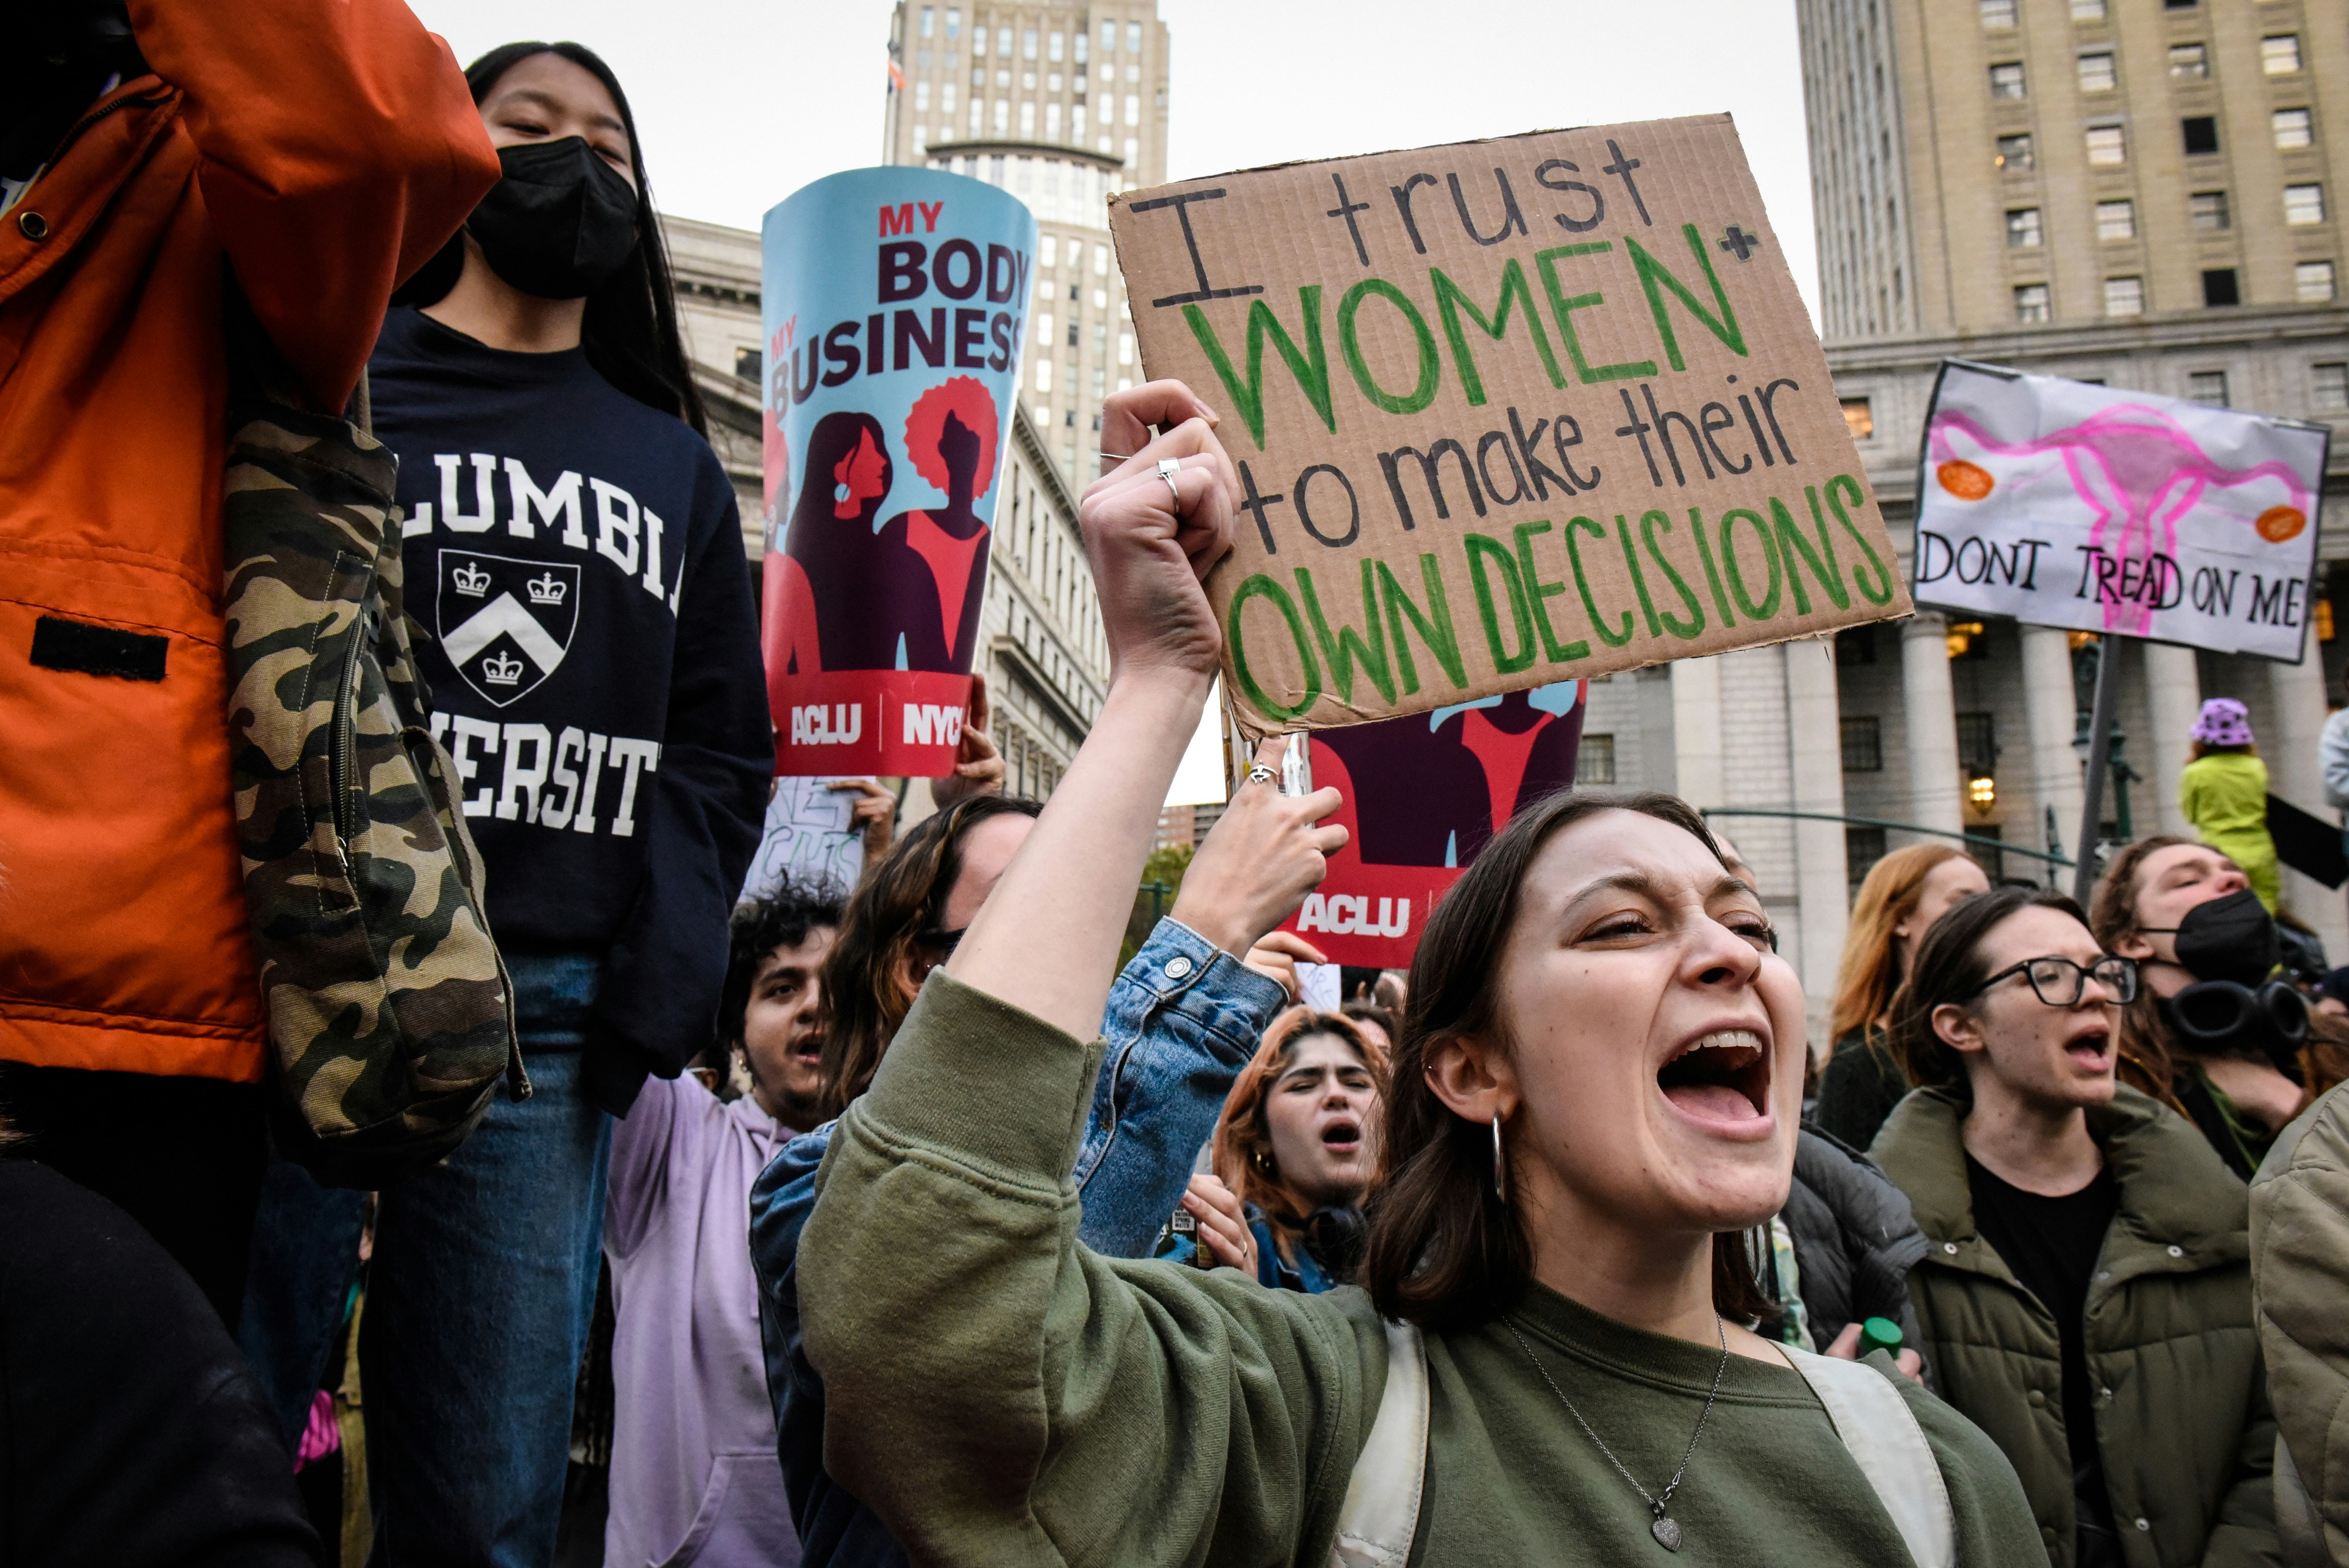 Demonstrators at an abortion-rights protest in New York, U.S., on Tuesday, May 3, 2022. Abortion rights suddenly emerged as an issue that could reshape the battle between Democrats and Republicans for control of Congress, following a report that conservatives on the U.S. Supreme Court were poised to strike down the half-century-old Roe v. Wade precedent. Photographer: Stephanie Keith/Bloomberg via Getty Images